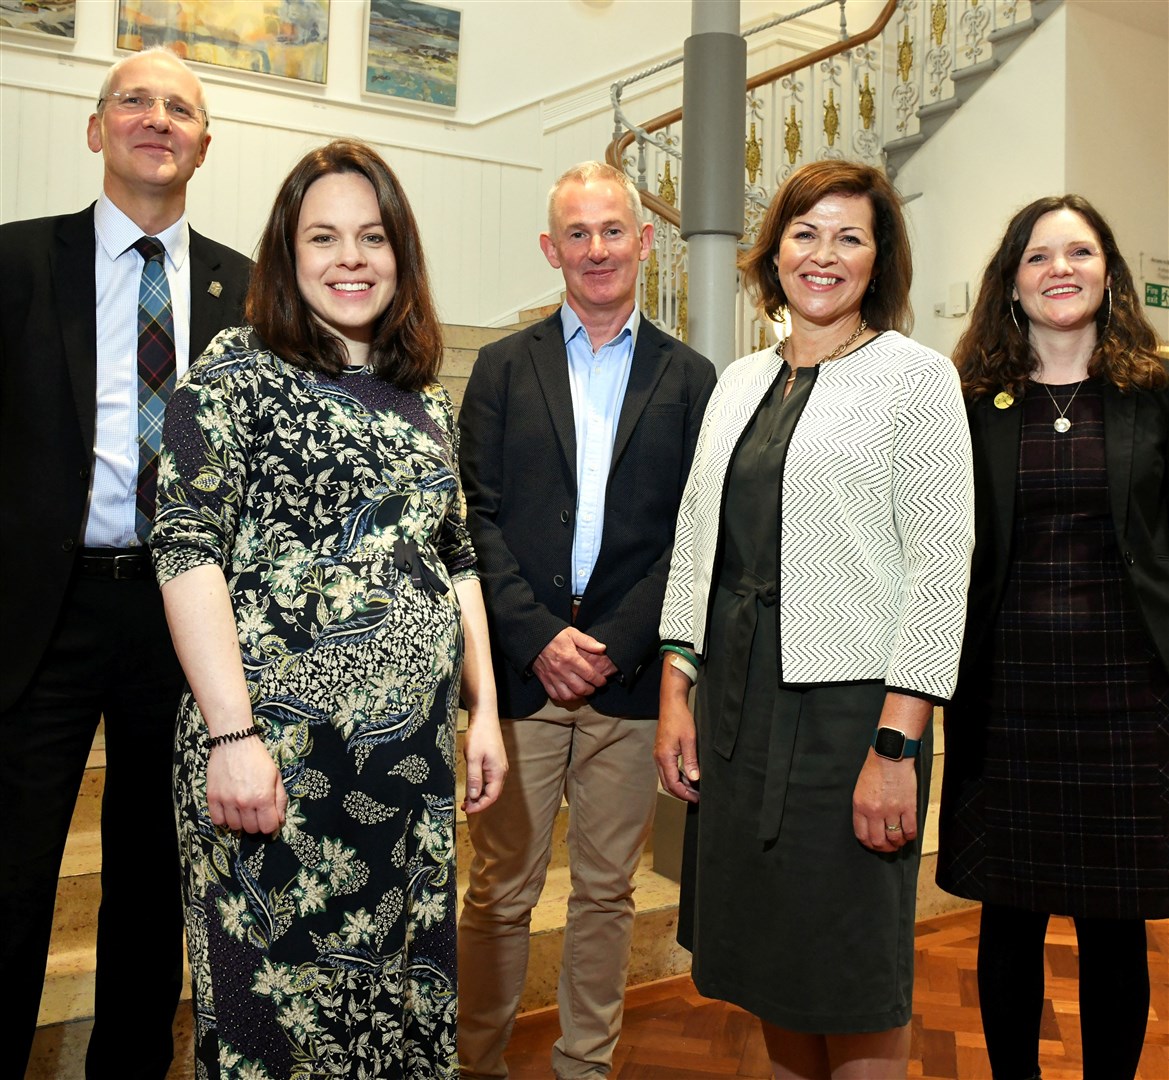 Stuart Black, HIE Chief Executive, Kate Forbes, Economy Secretary, Mark Logan, Chief Entrepreneur, Audrey Carlin, WASPS CEO and Claire English, WASPS Funding & Partnerships Manager. Picture: James Mackenzie.